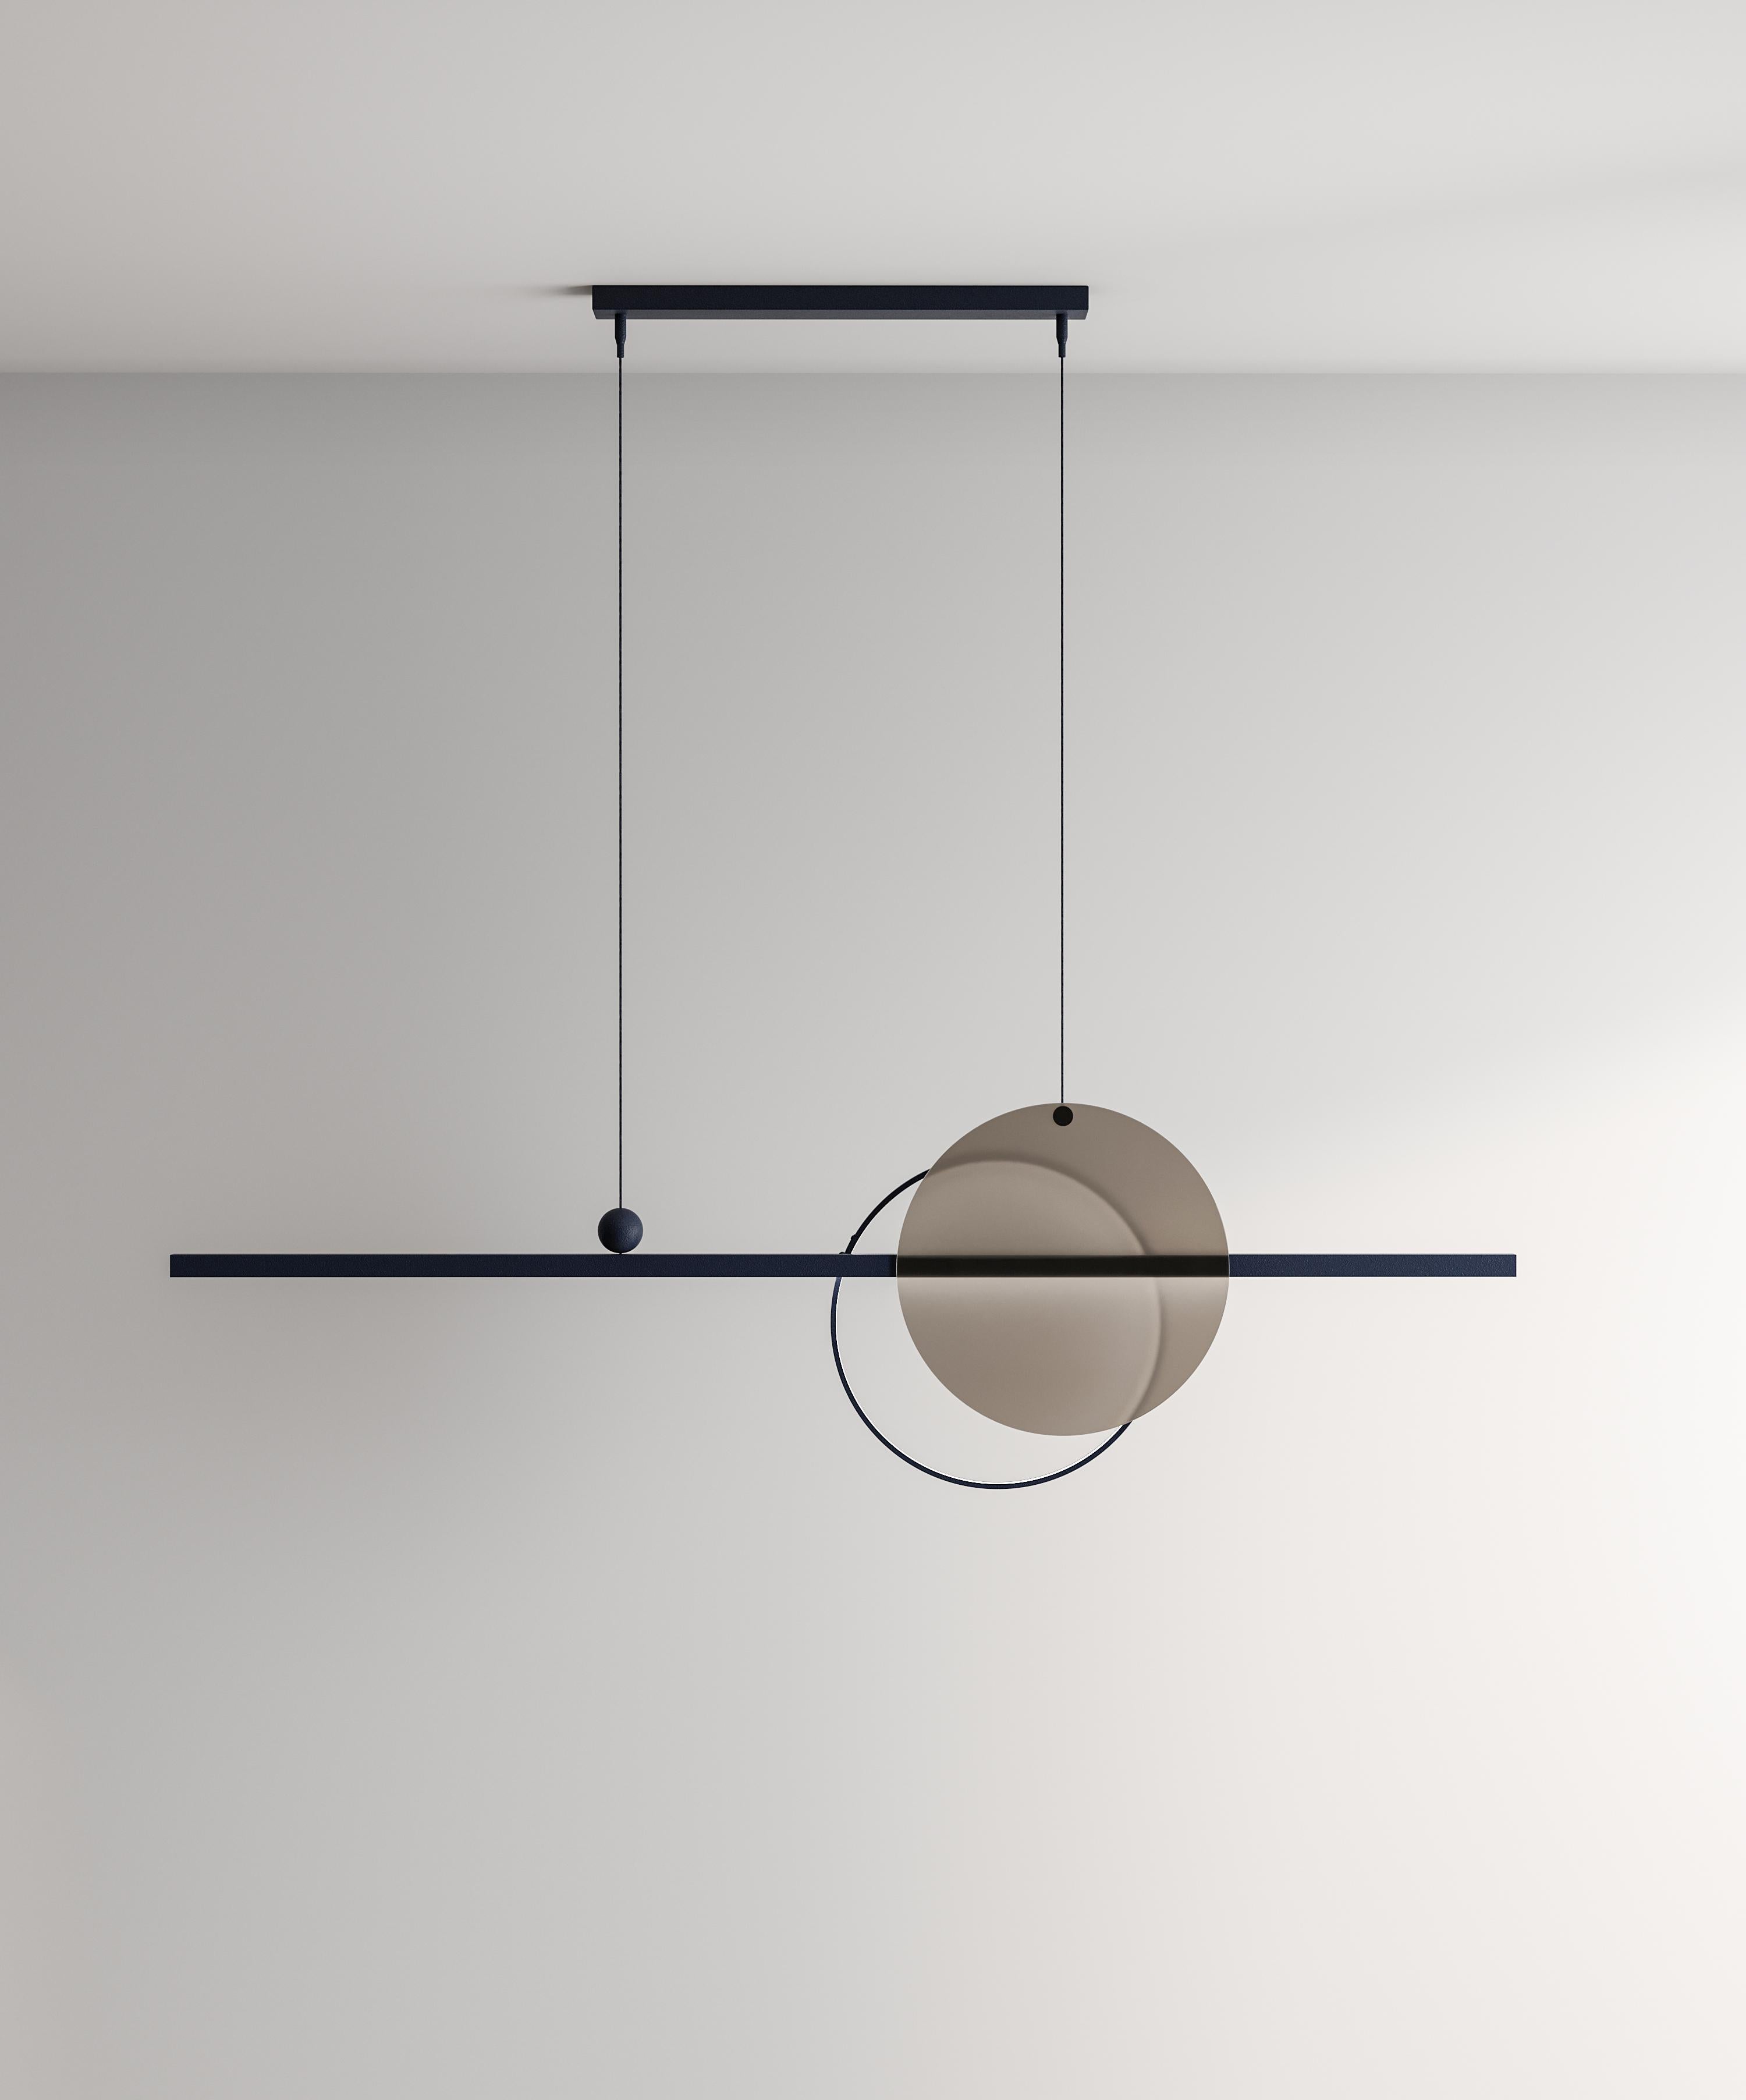 Minimalistic Ceiling Lamp, Glass Edition, Modern Style In New Condition For Sale In Vilnius, LT